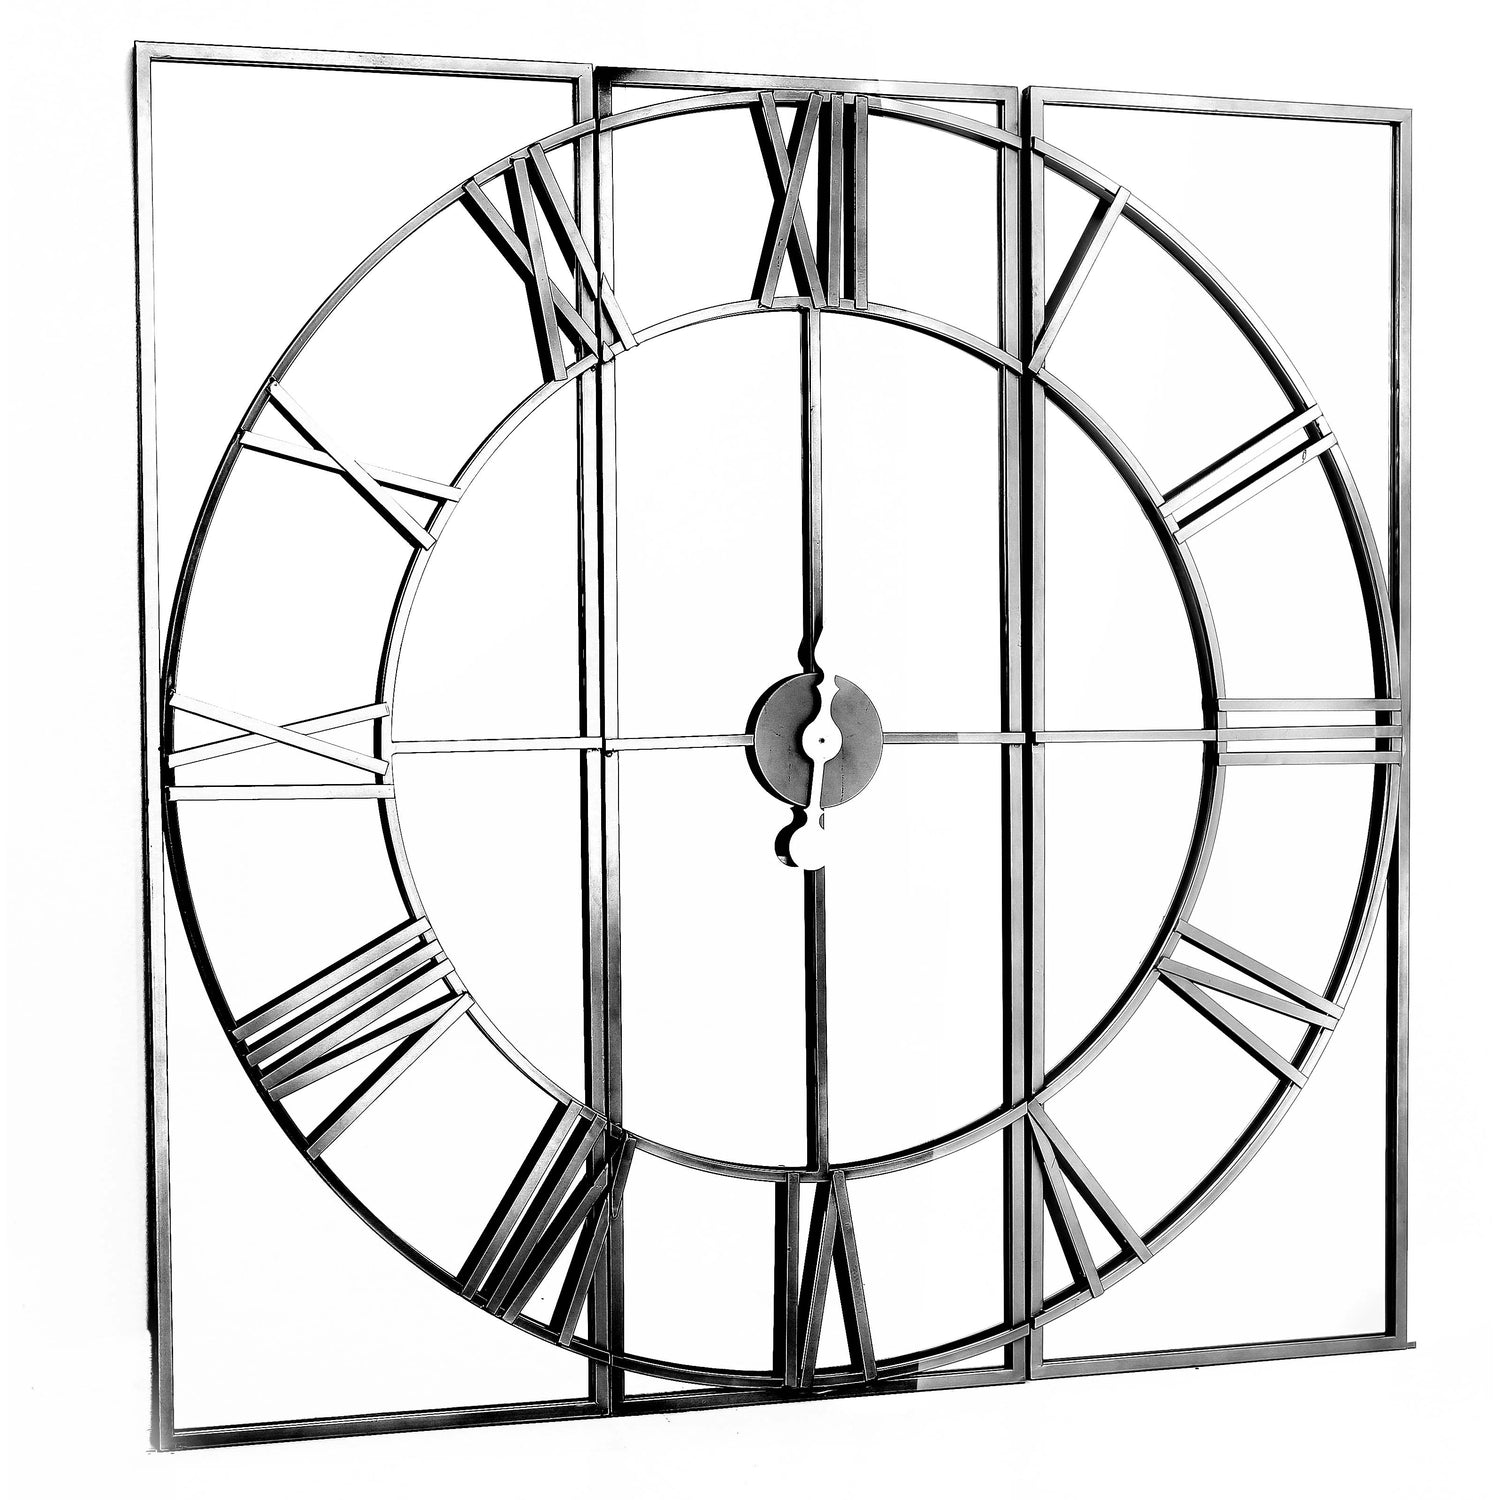 View Celina Mirrored Wall Clock information